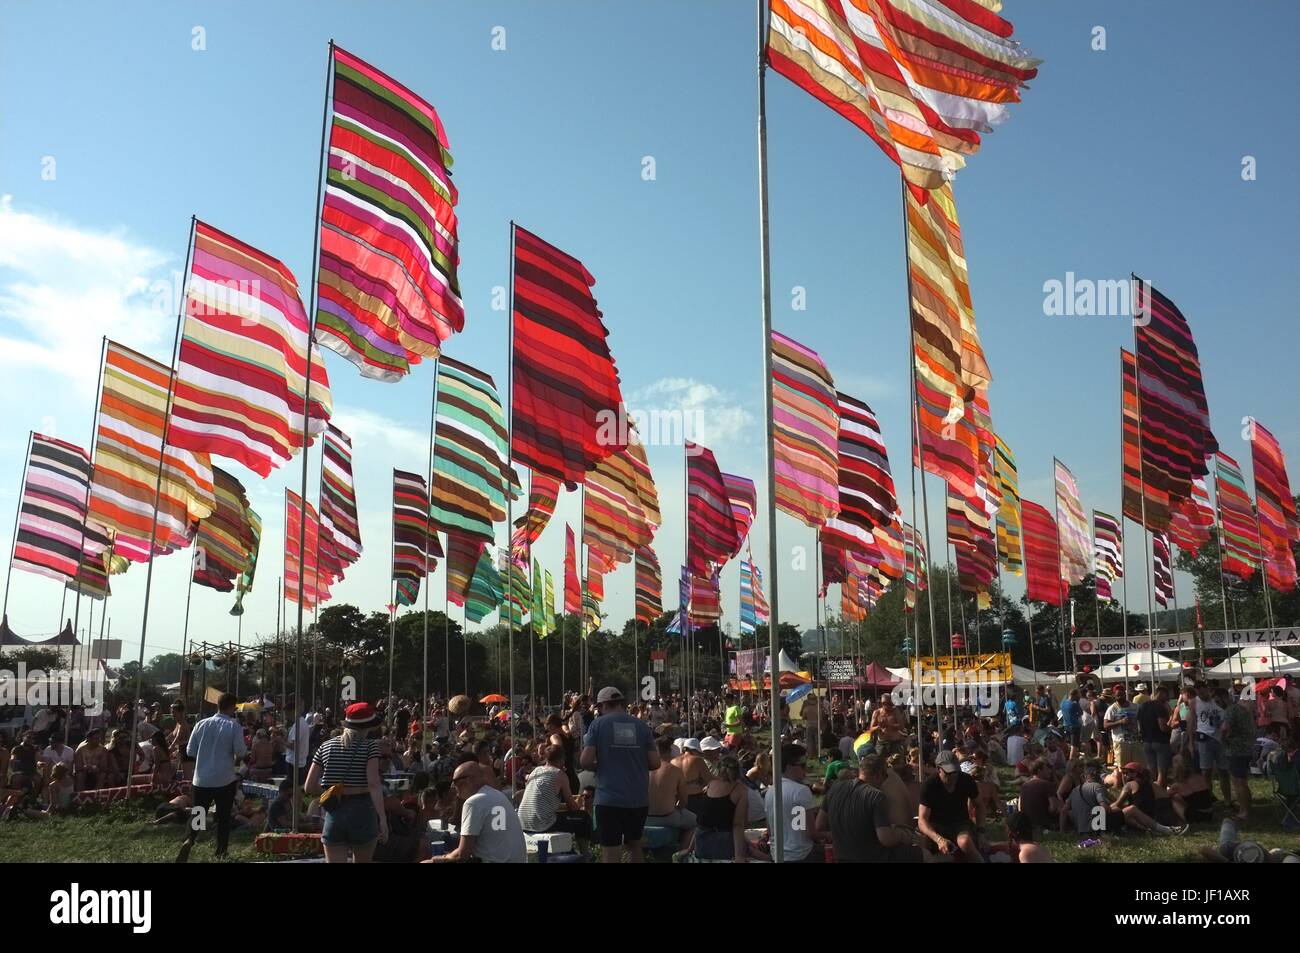 People sitting beneath colourful flags near the West Holts Stage at Glastonbury Festival, Pilton, Somerset, England, United Kingdom, June 2017. Stock Photo